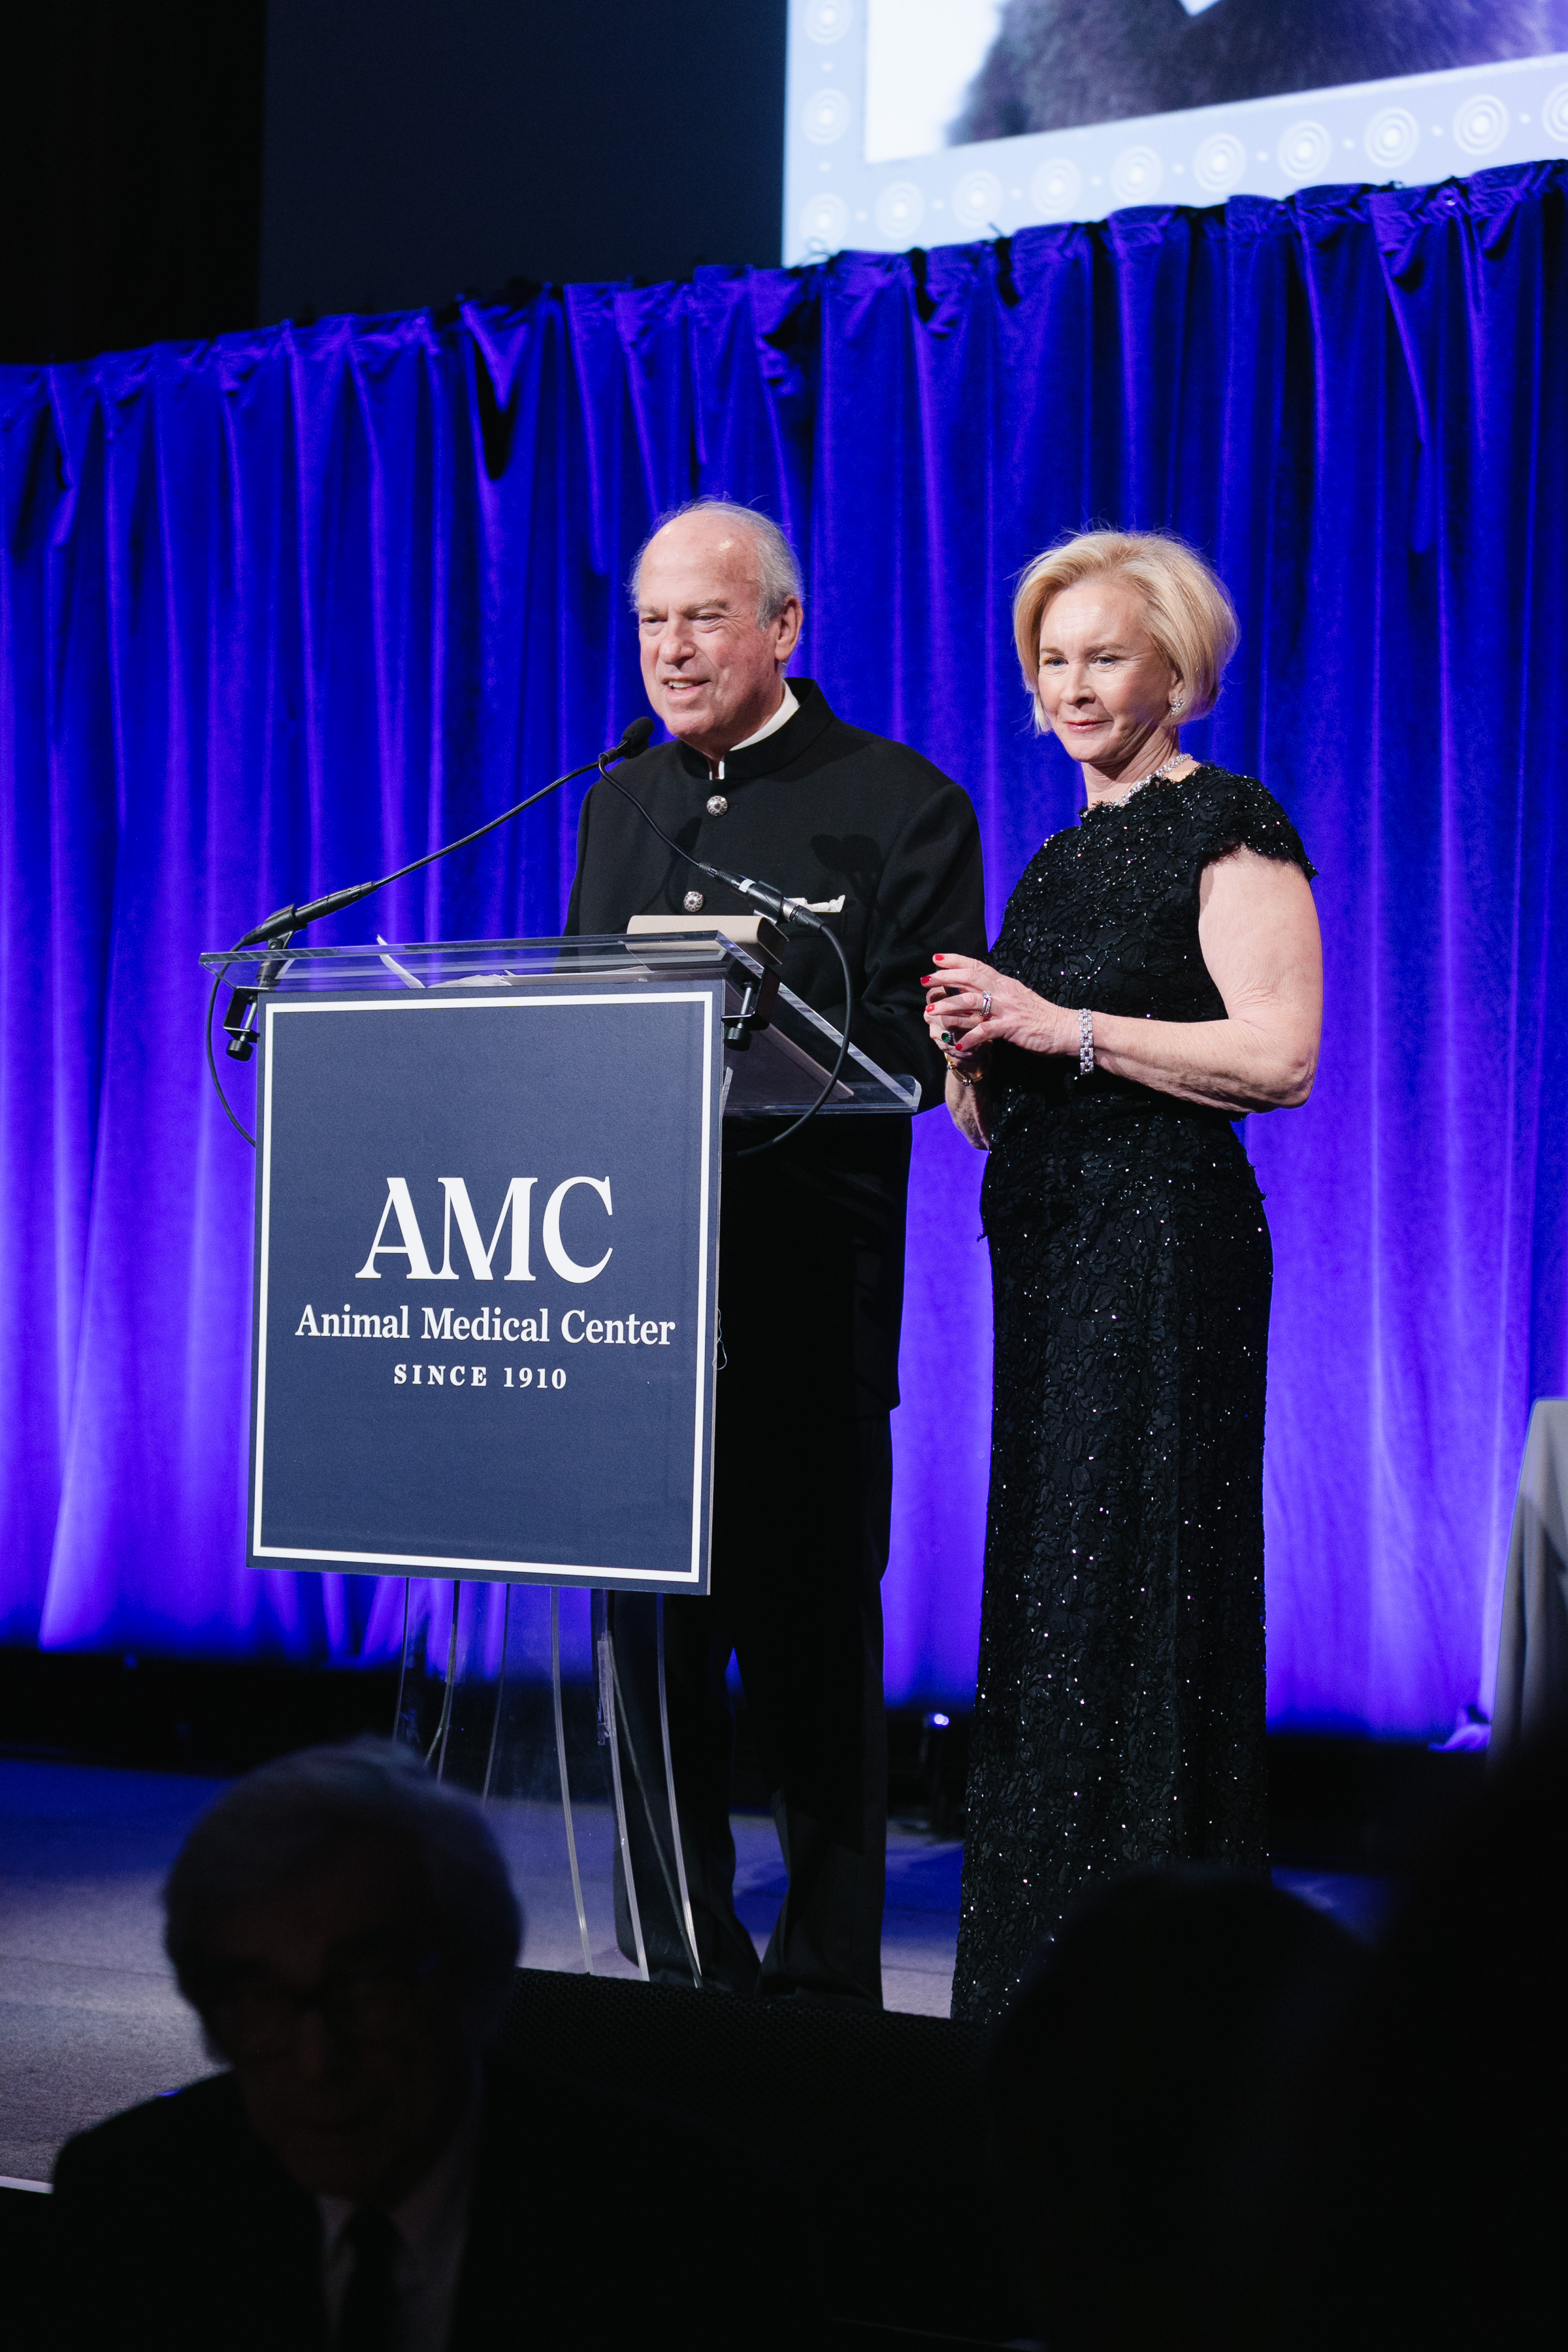 AMC CEO Kate Coyne and AMC Board Chair Robert Liberman deliver opening remarks at AMCs Top Dog Gala